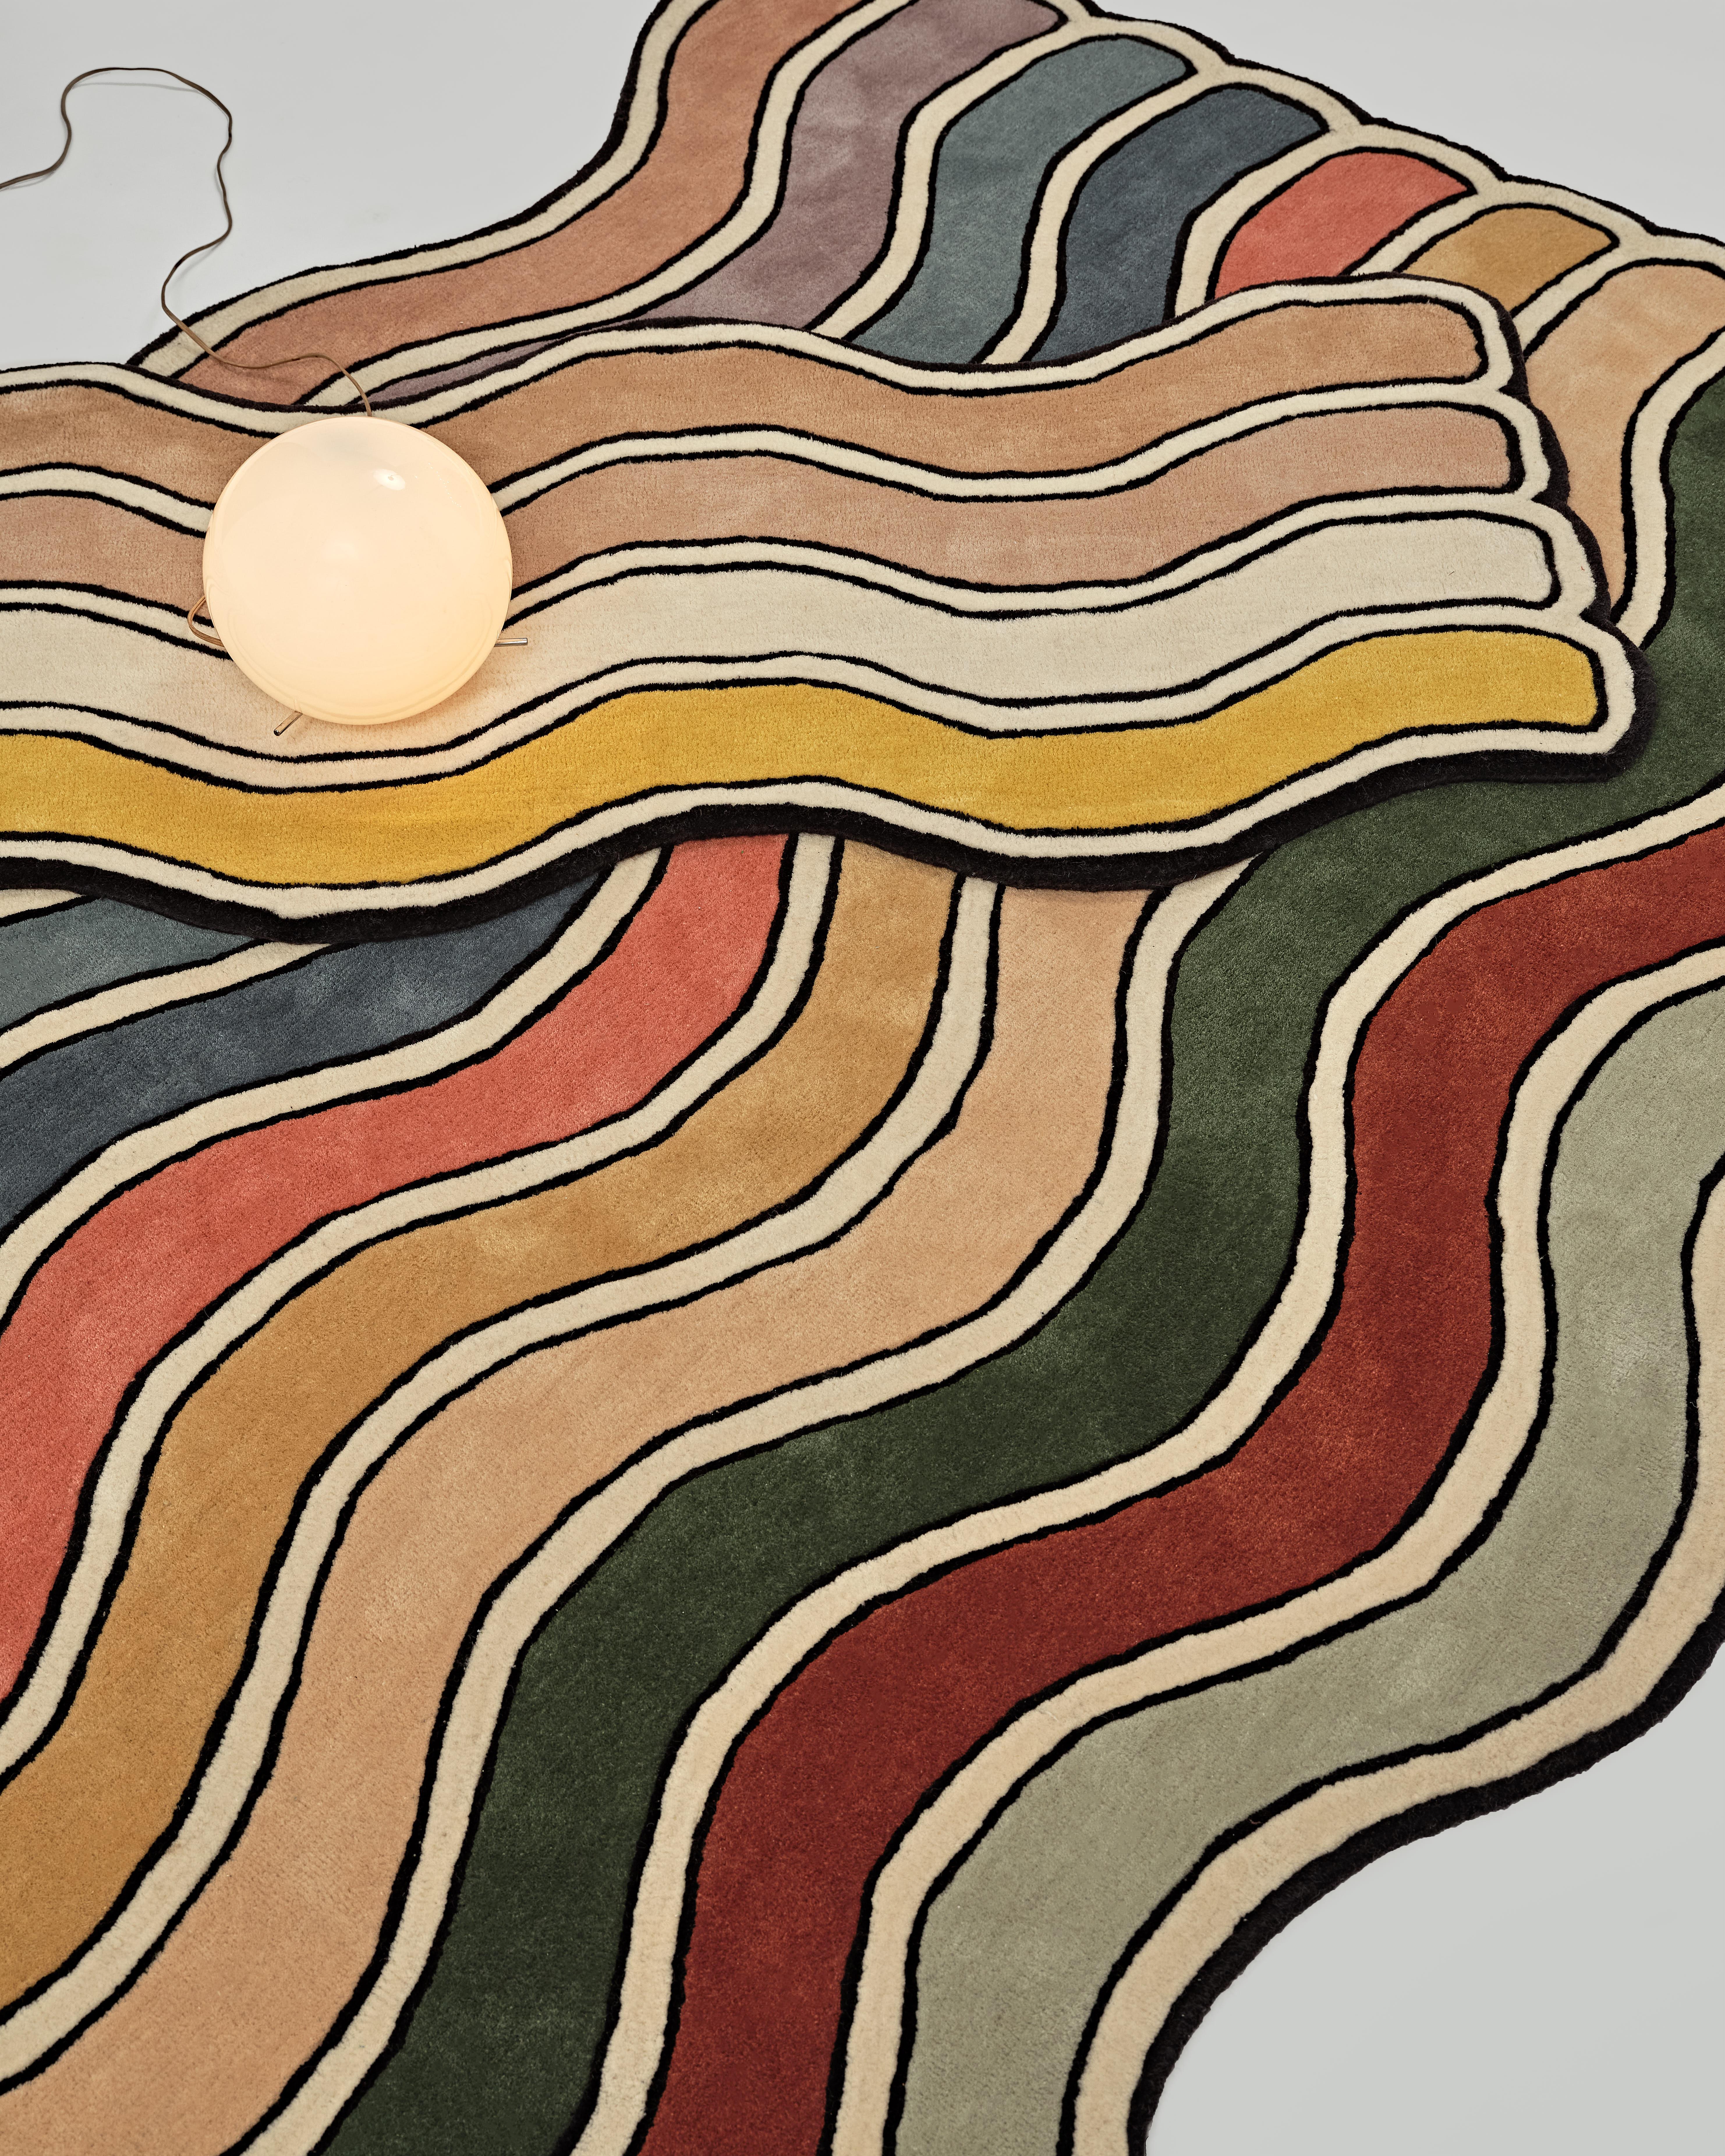 The “Court Series” rugs are hand-tufted with blended wool and viscose material dyed in hyper-saturated colors, with tennis court-like geometries represented both via overlaid graphics as well as the cut and shape of individual segments.

Custom